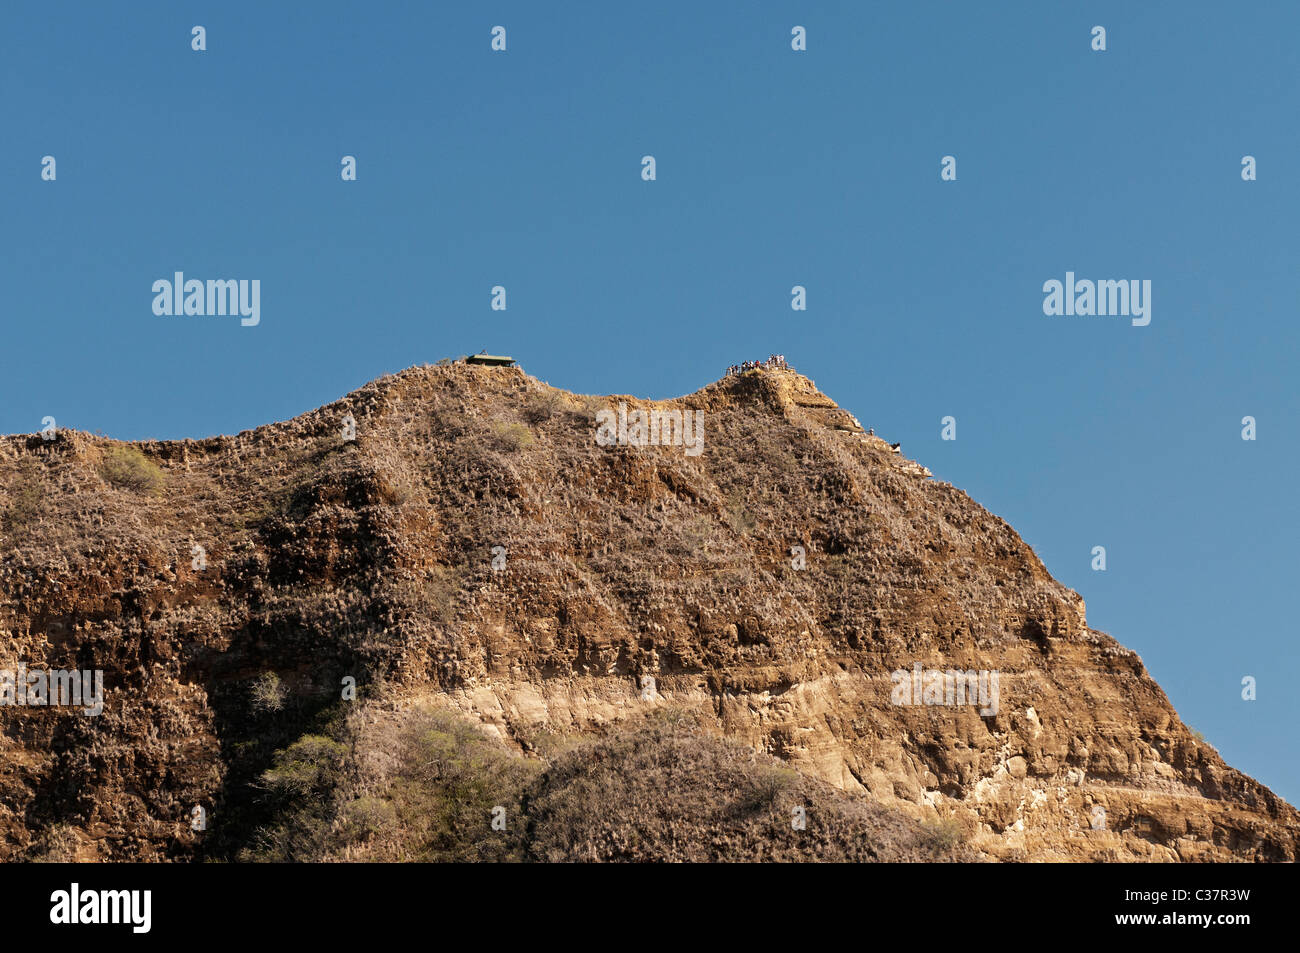 Diamond Head, a tuff cone volcanic crater is one of Hawaii's best known natural landmarks and Waikiki's backdrop. Stock Photo